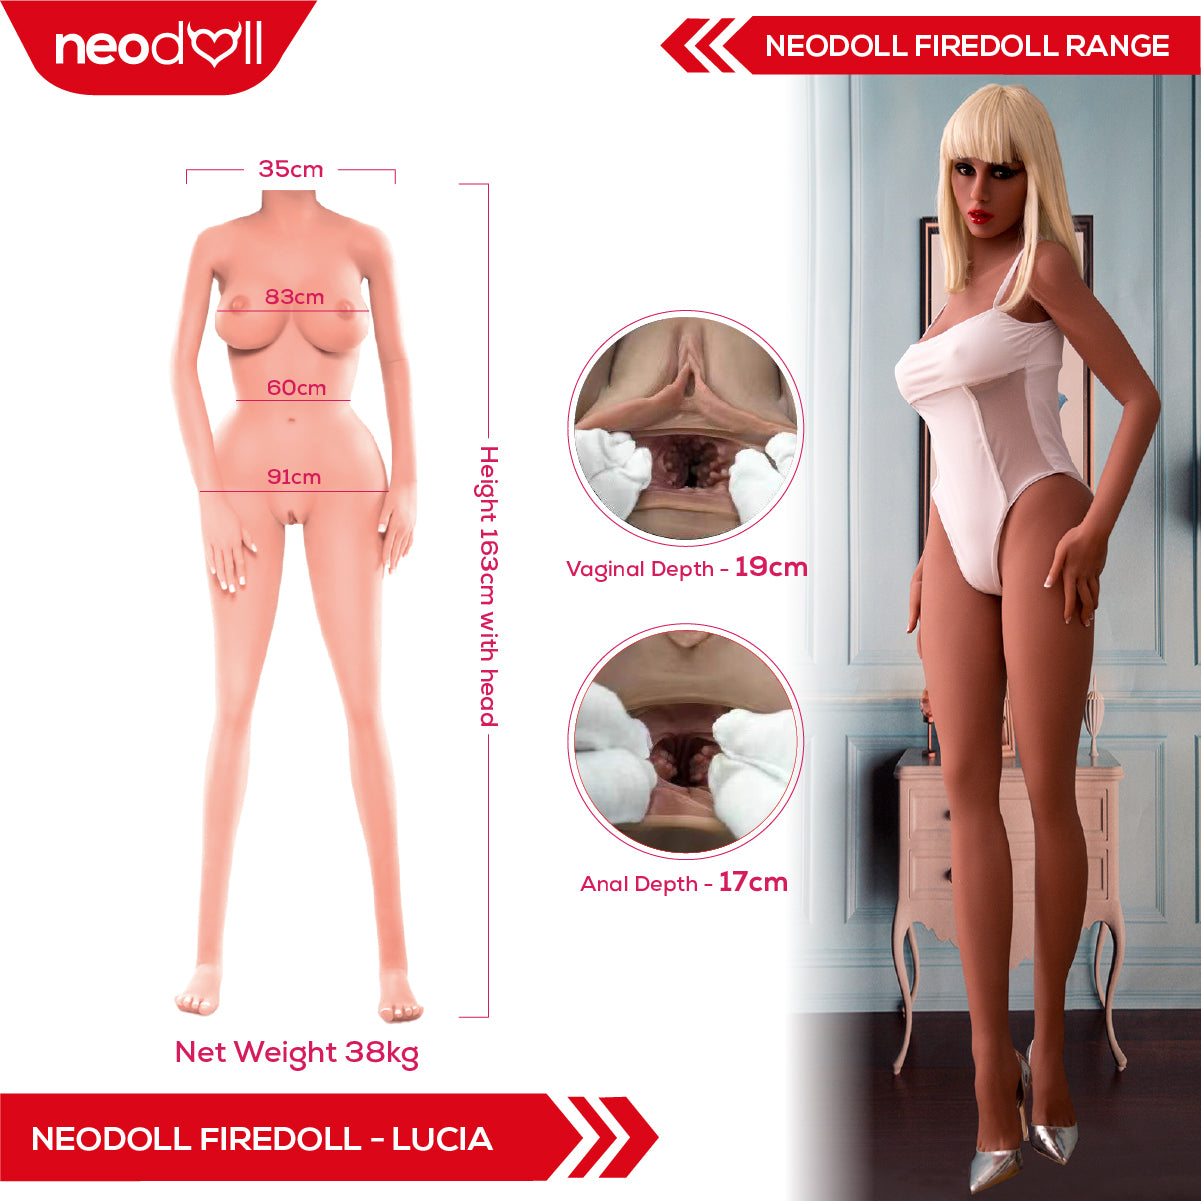 Firedoll - Lucia - Realistic Sex Doll - Tongue included - 163cm - Light Tan